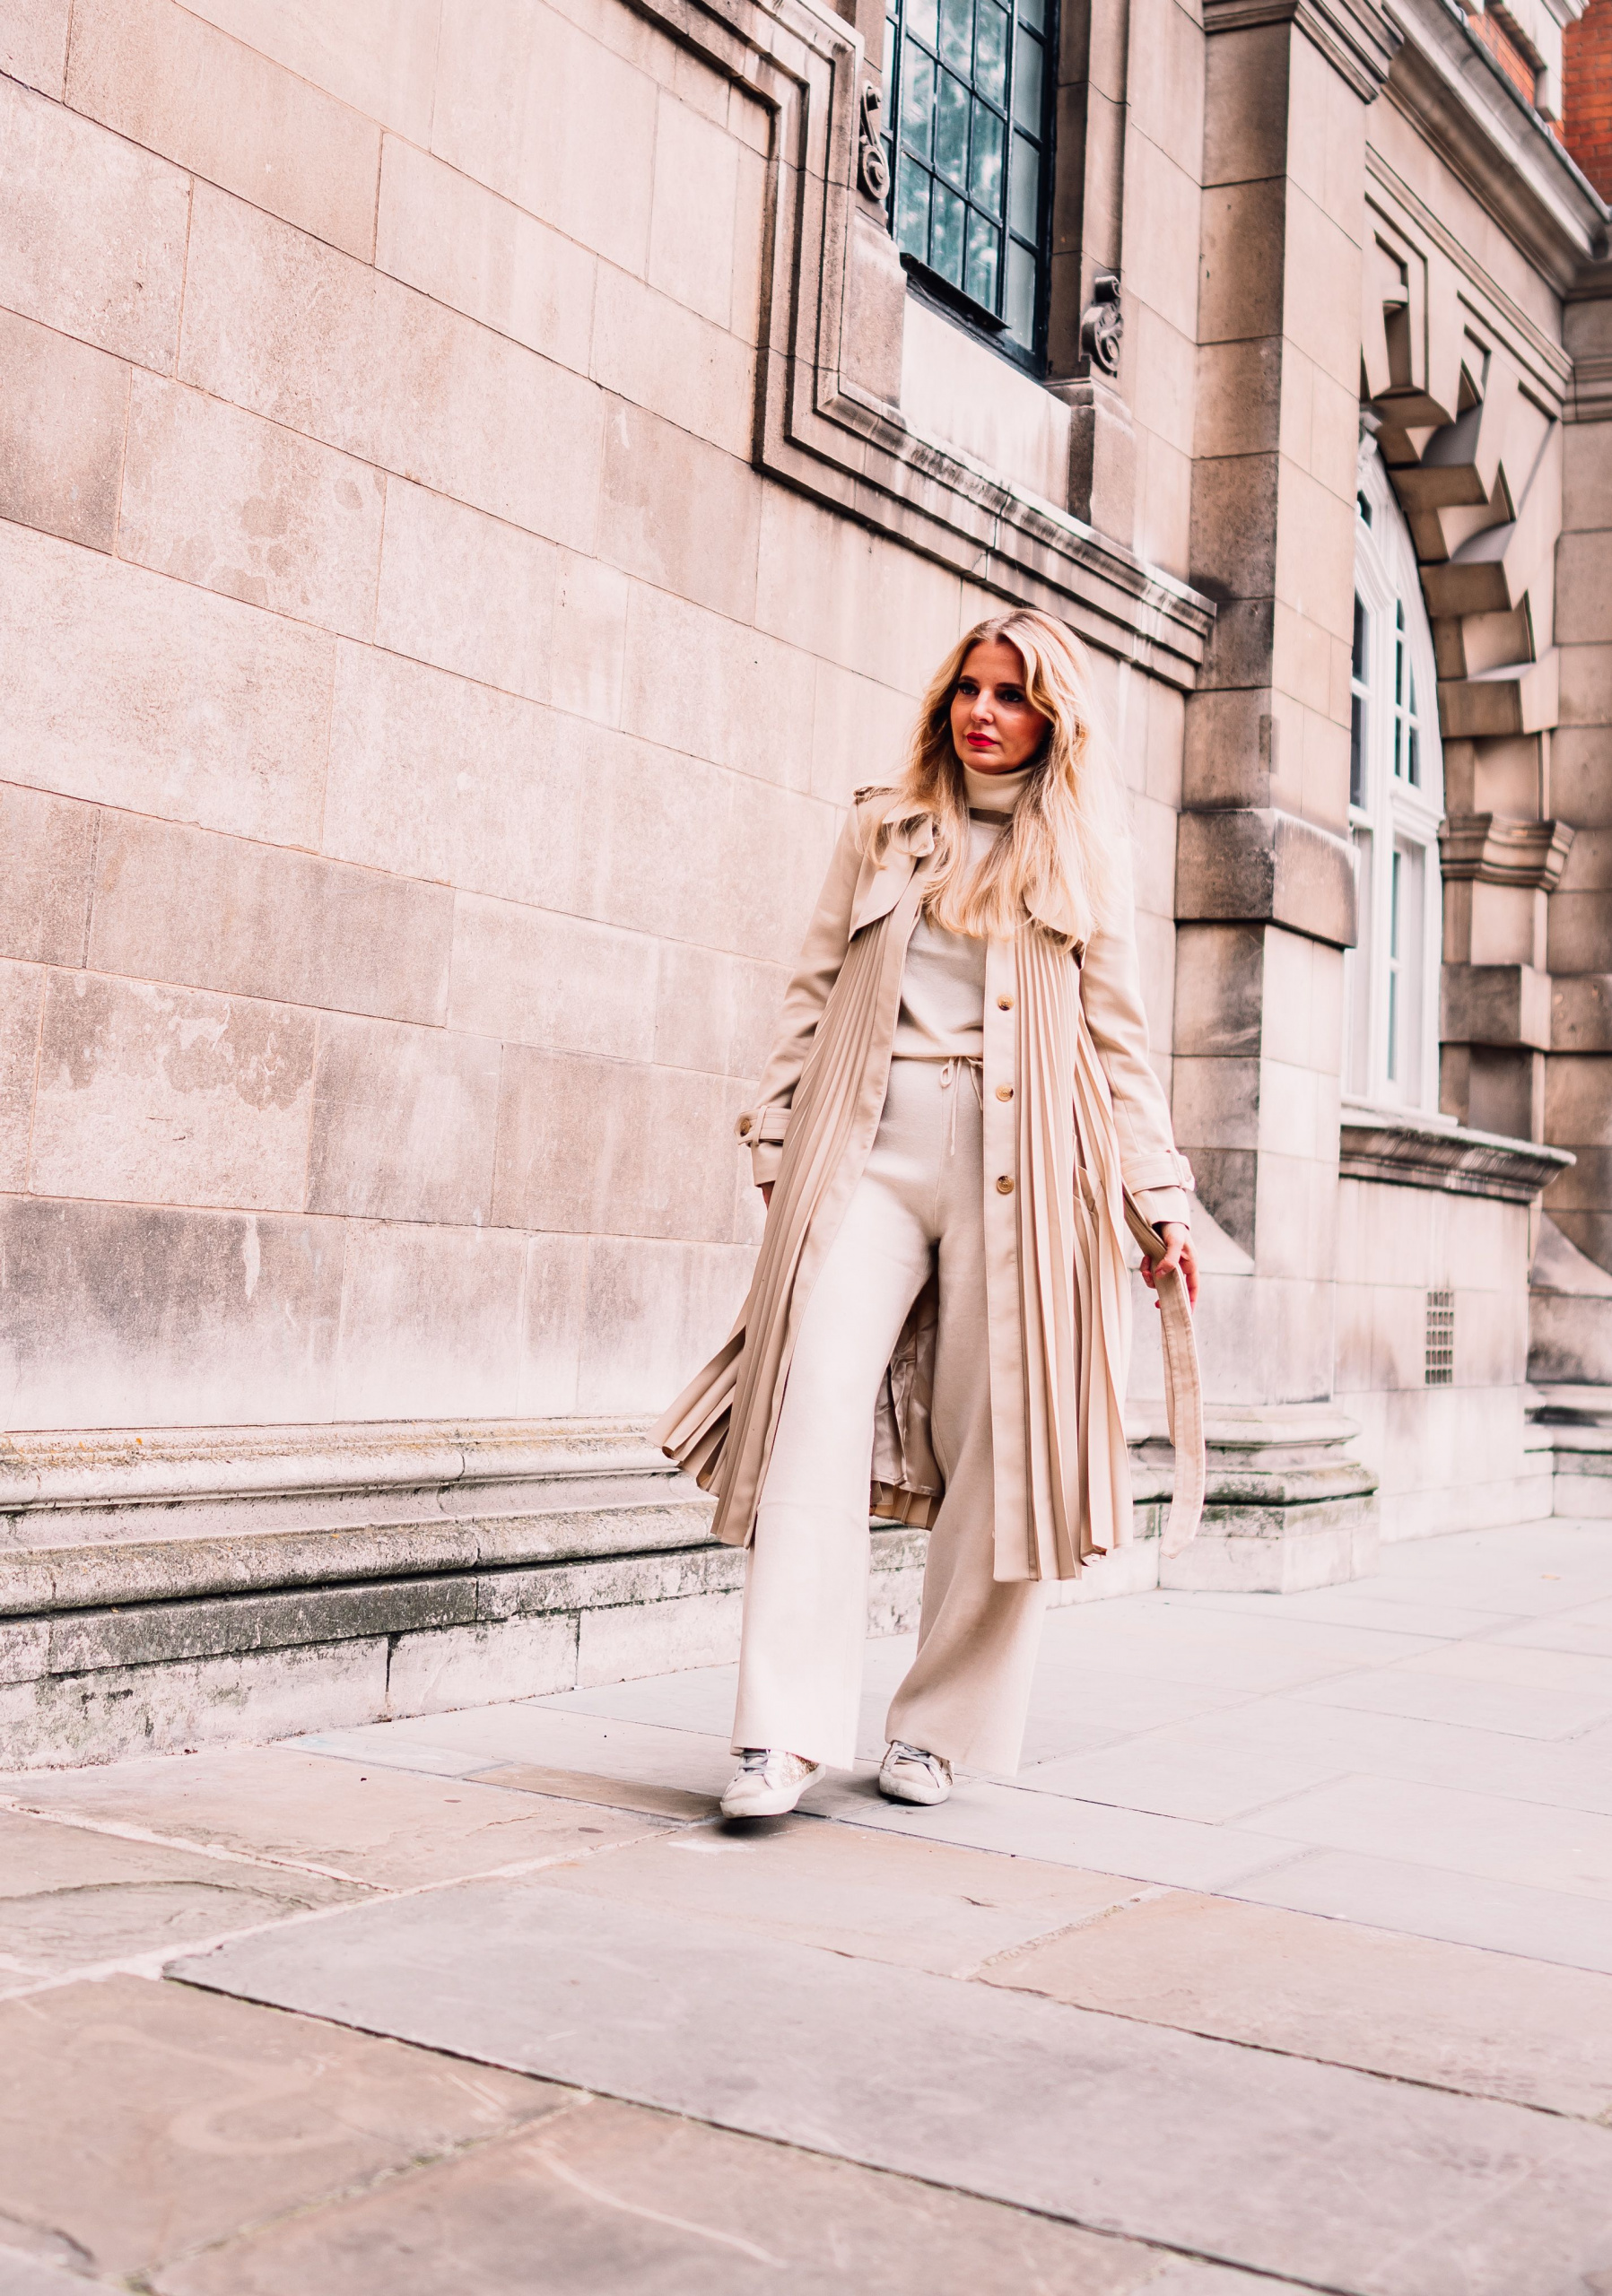 Sandro trench, why a chic trench coat belongs in every woman's closet, wardrobe basics, trench coats women over 40, trench coat outfits, erin busbee